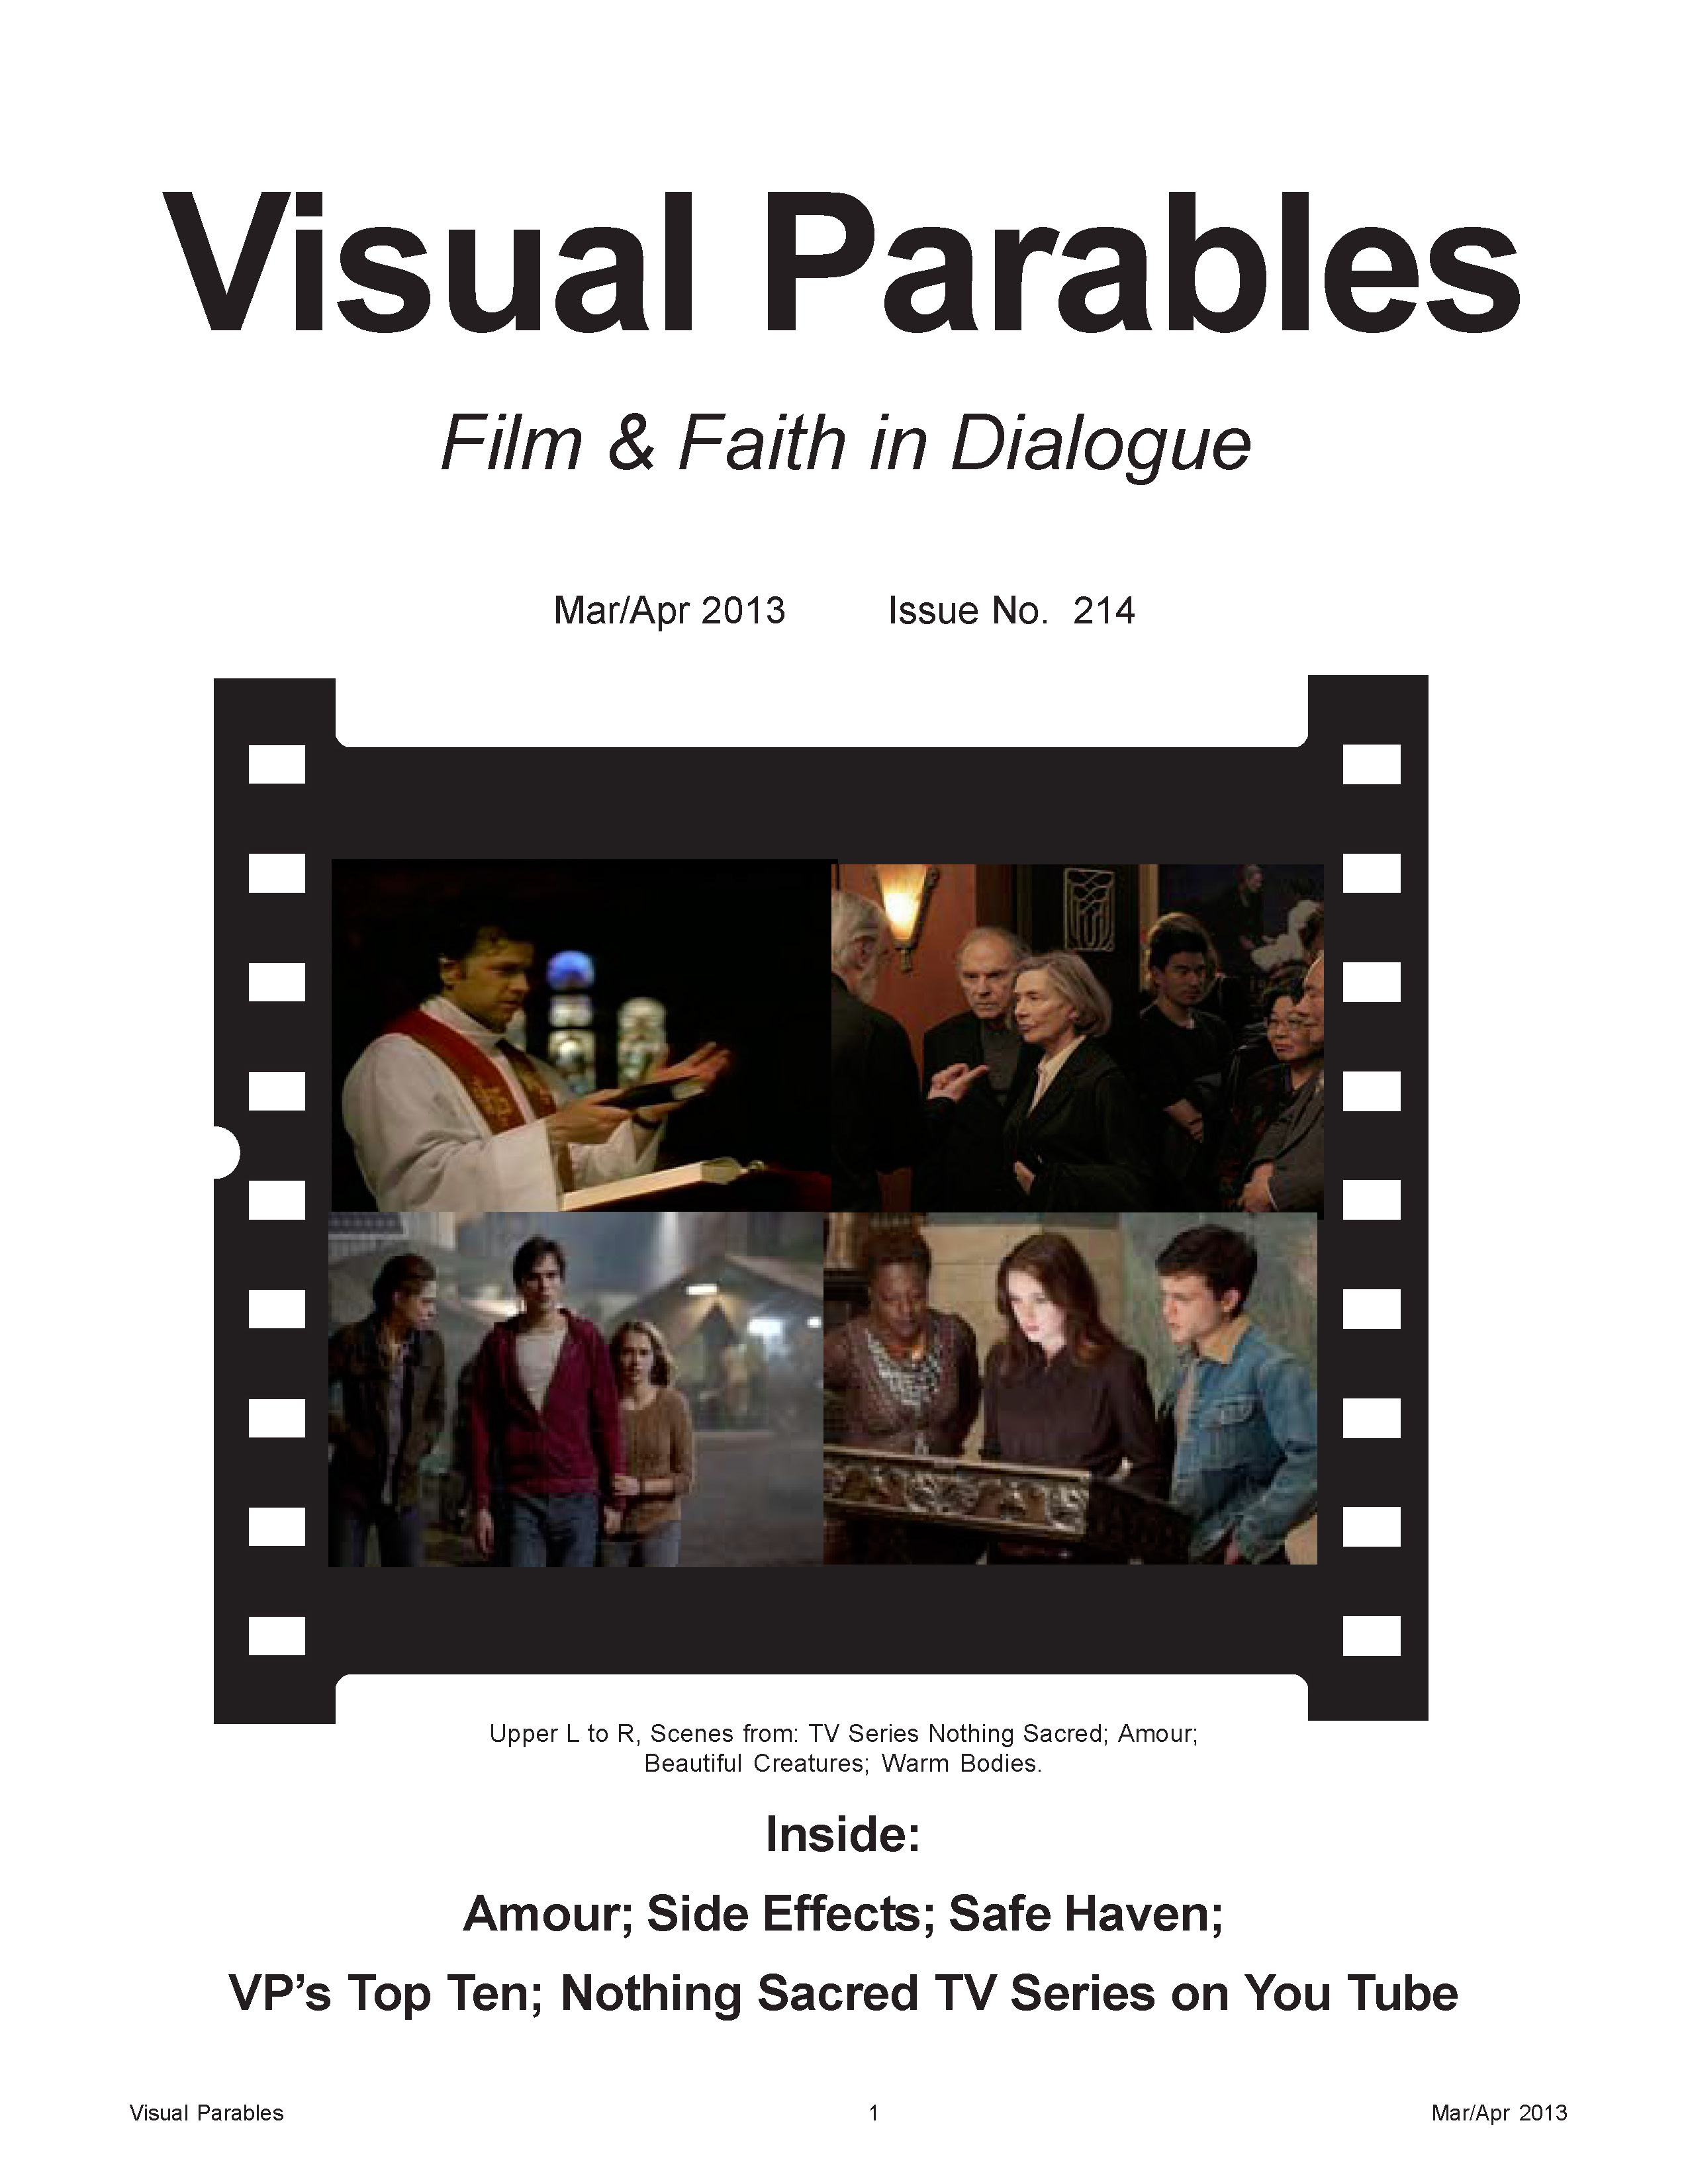 March / April 2013 issue of Visual Parables